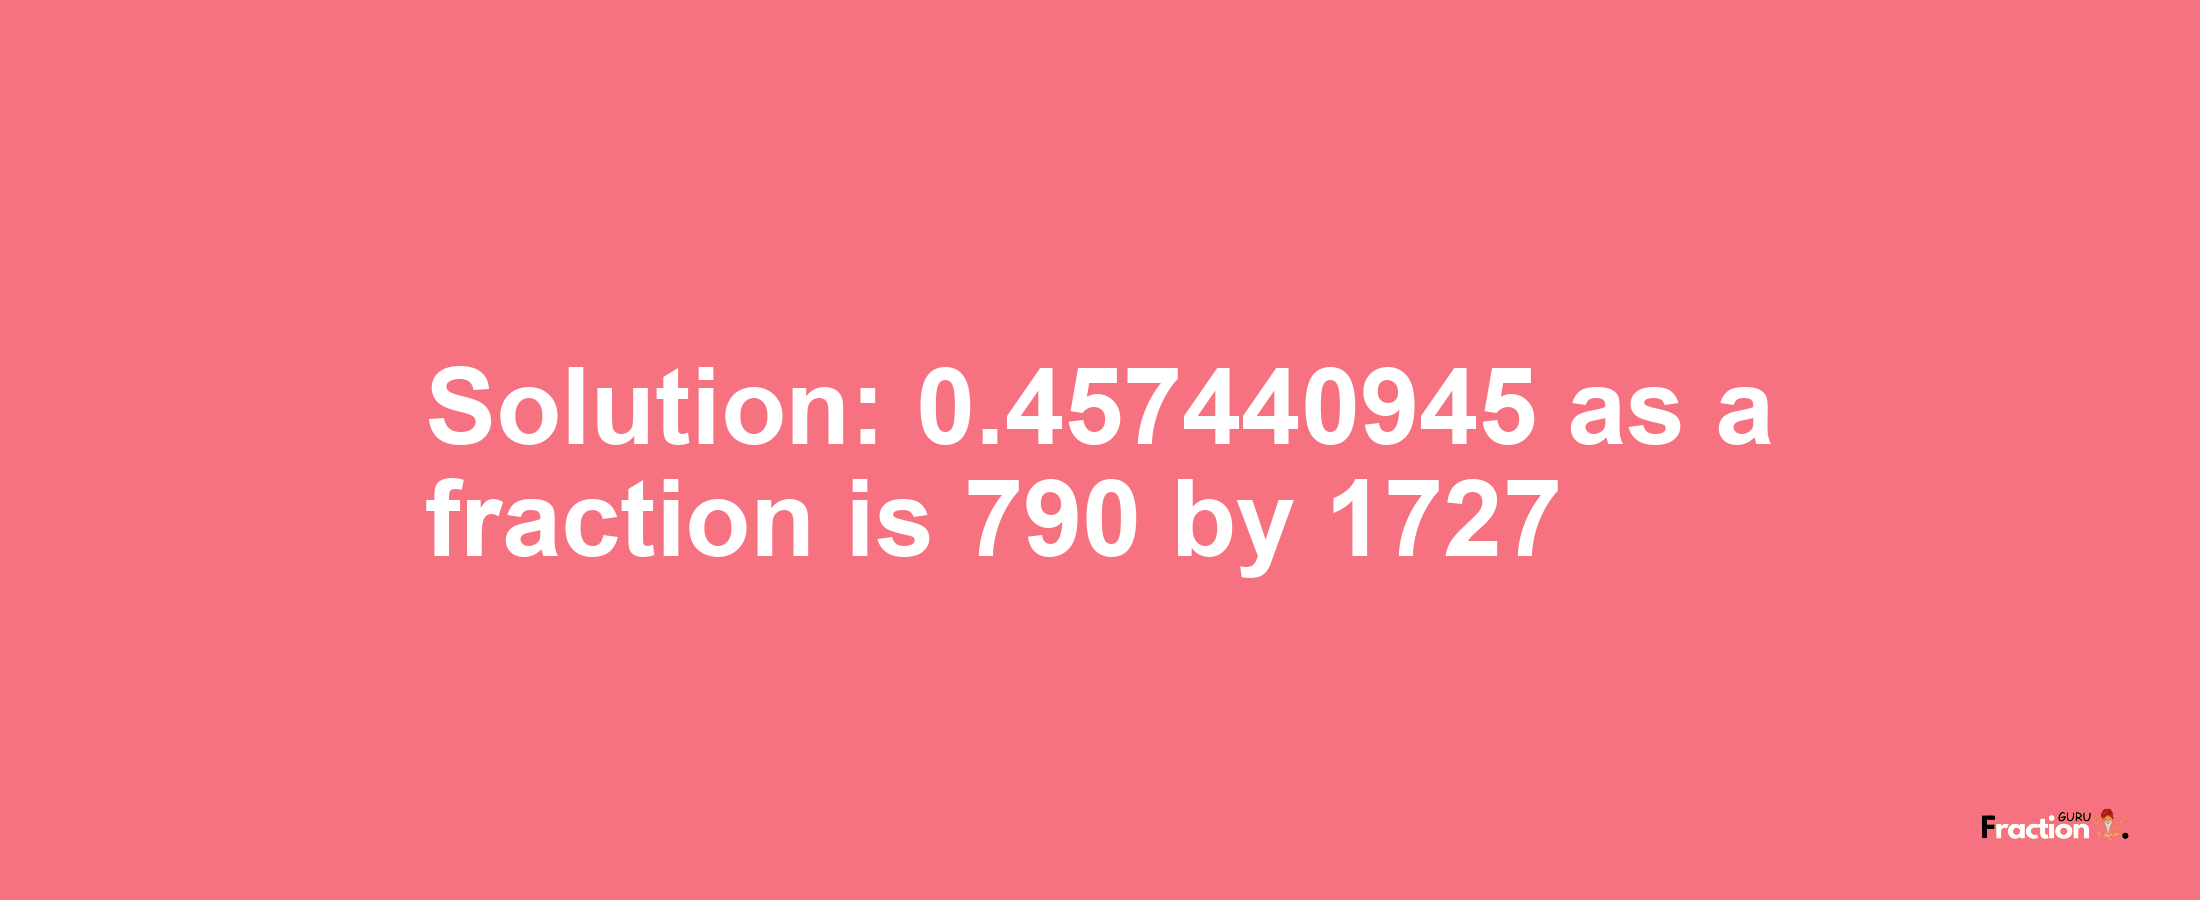 Solution:0.457440945 as a fraction is 790/1727